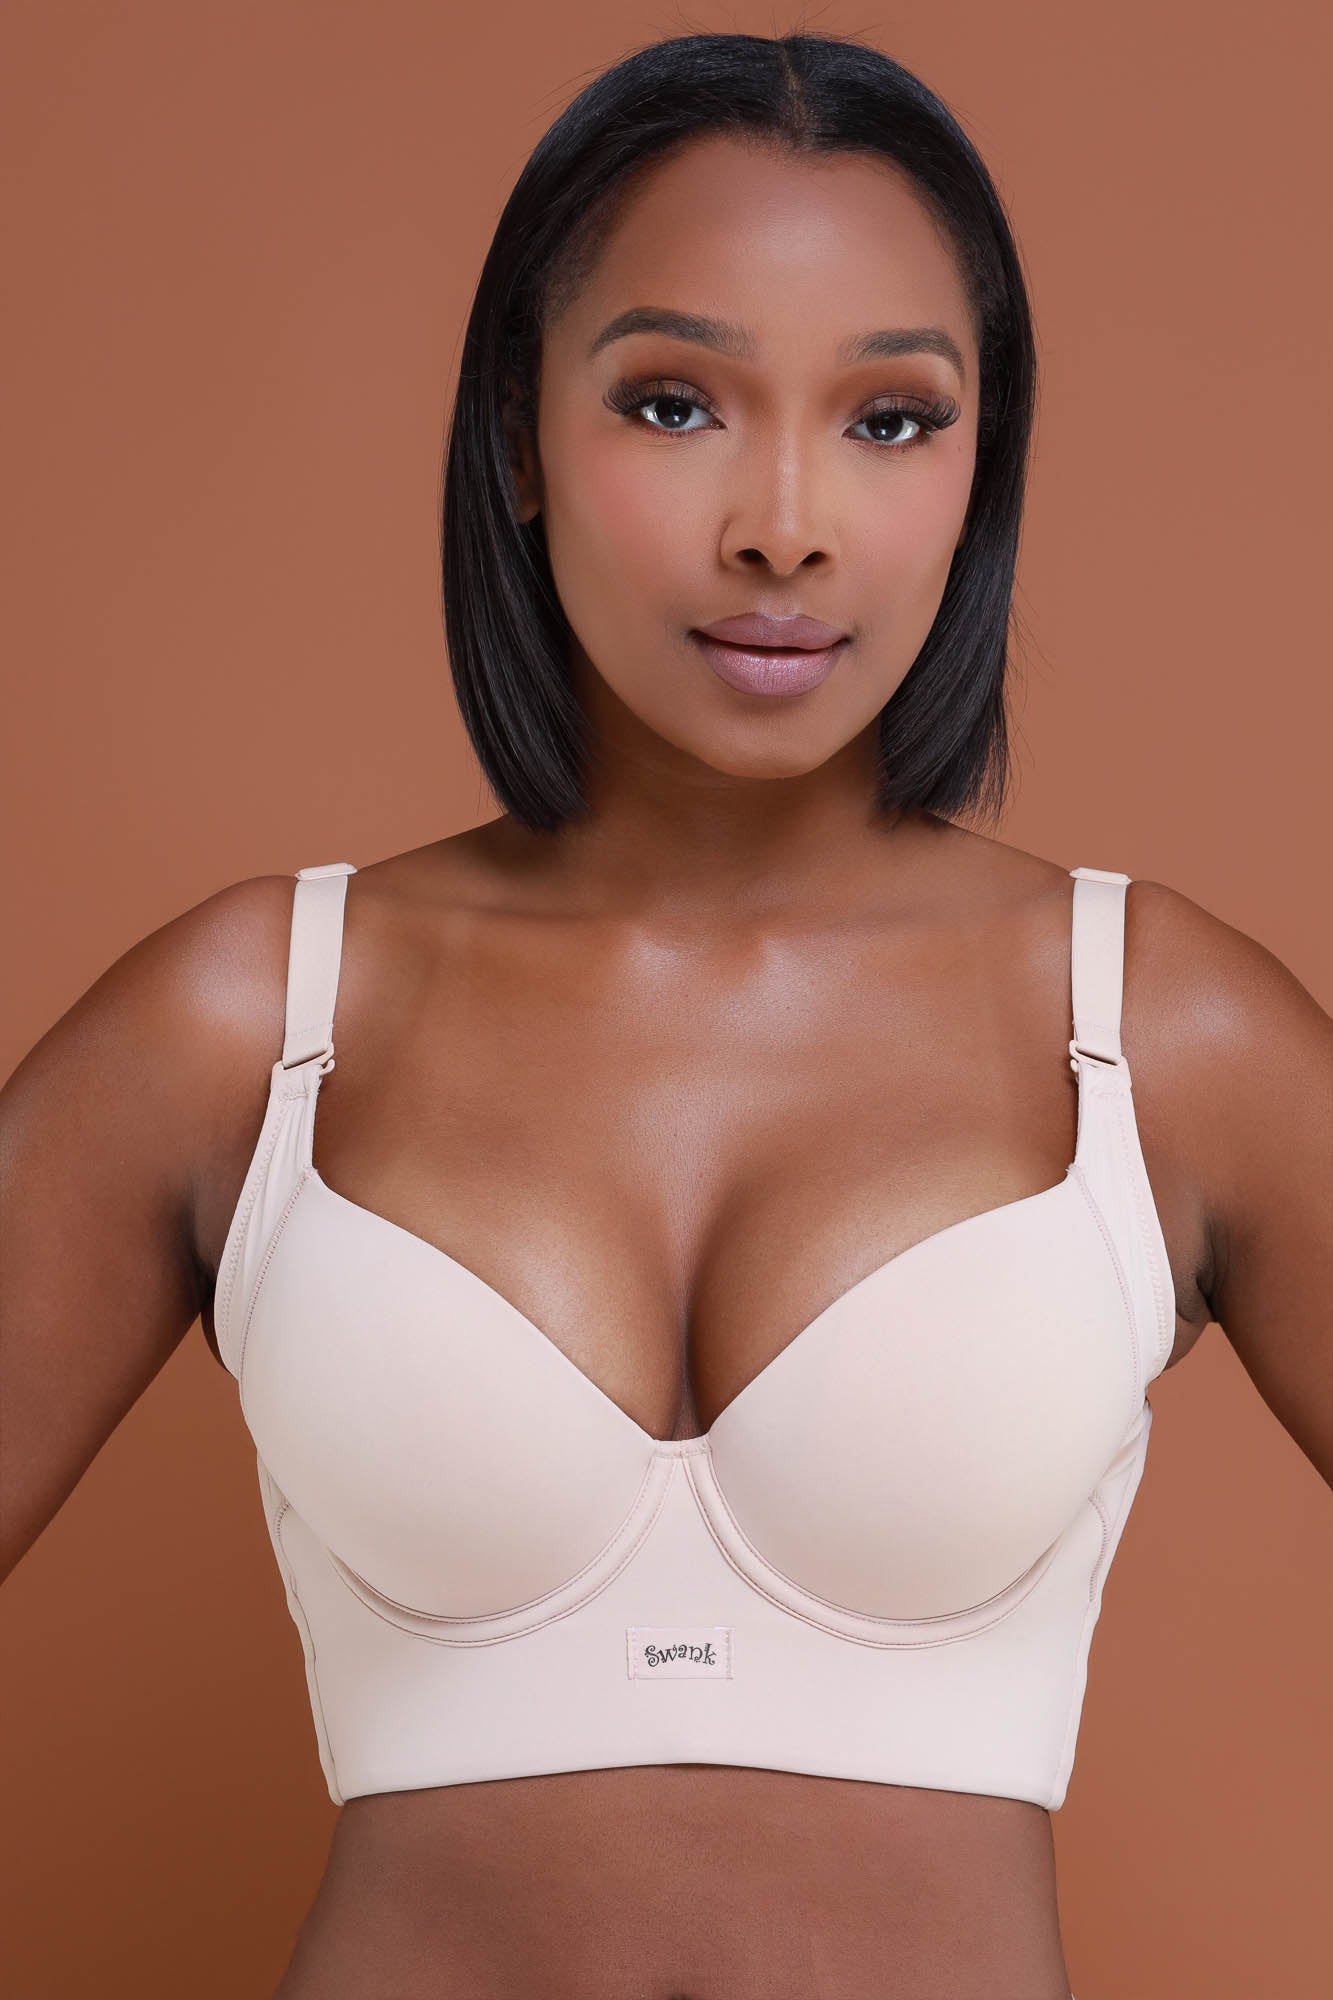 How to shop for the right bra and shape wear online